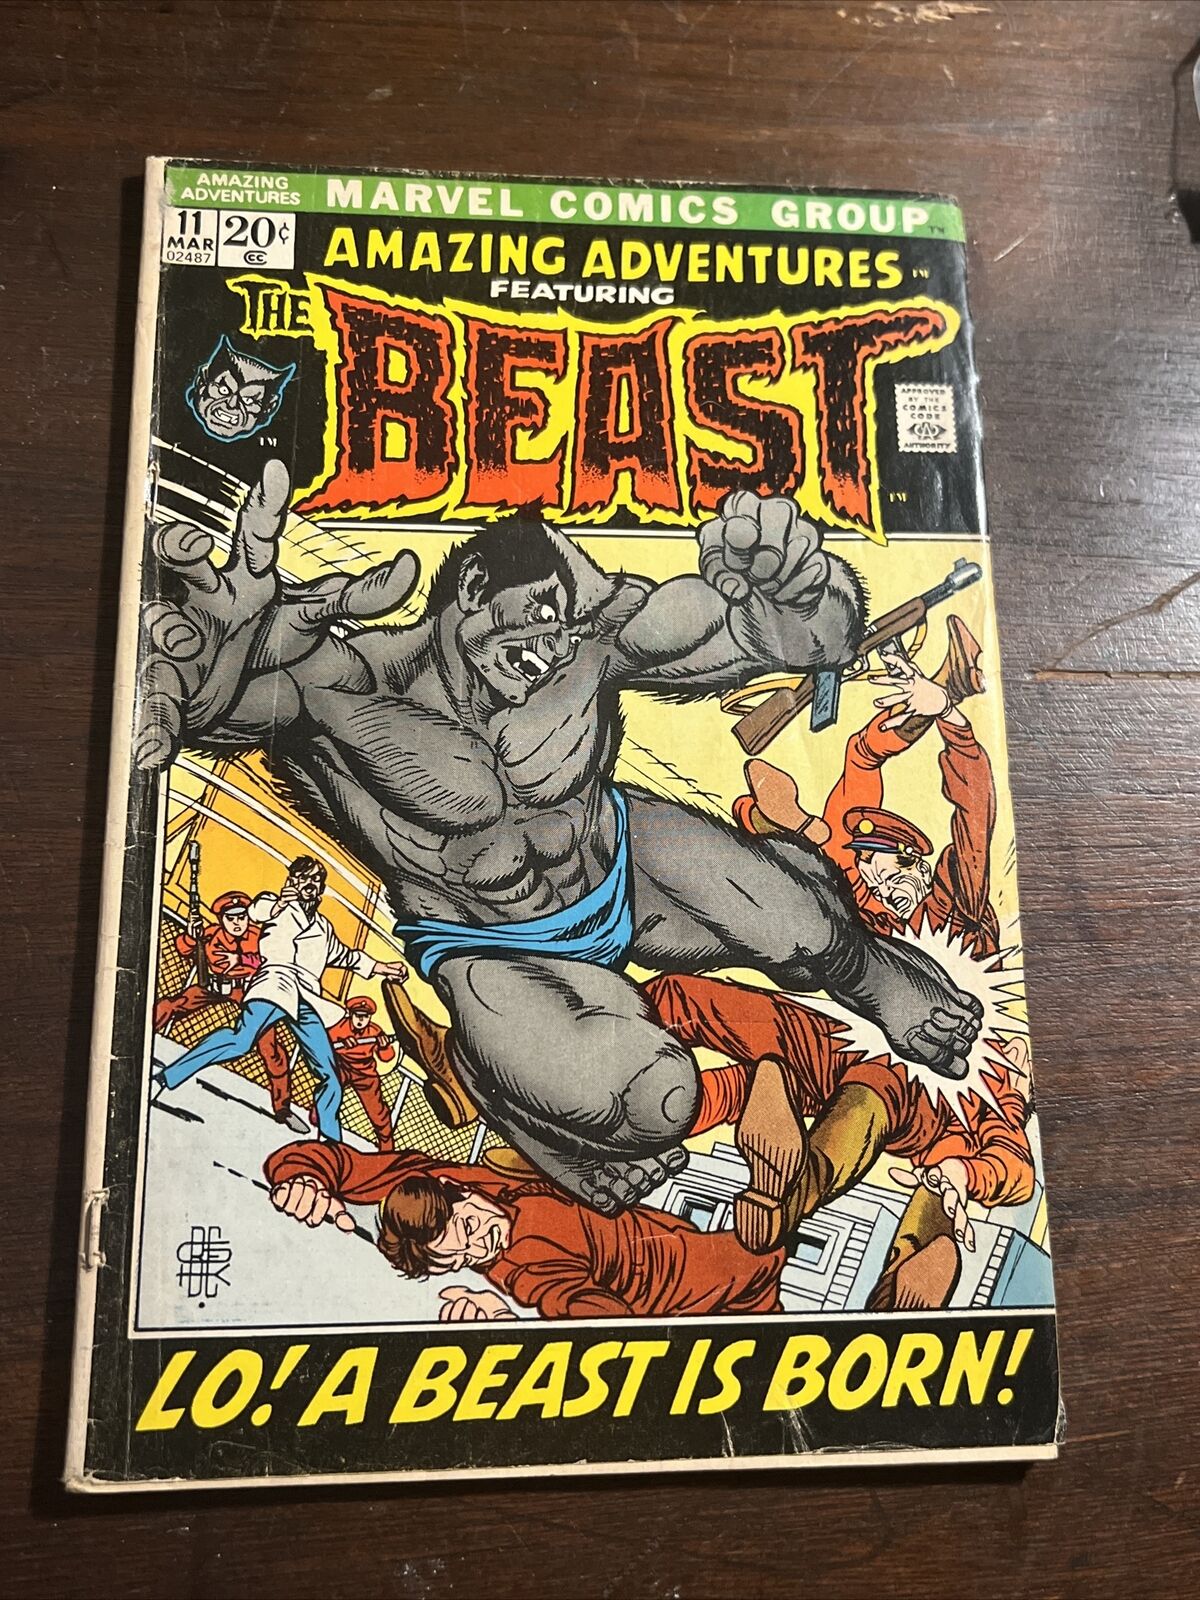 AMAZING ADVENTURES #11 KEY  1ST APPEARANCE OF BEAST IN MUTATED HAIRY FORM